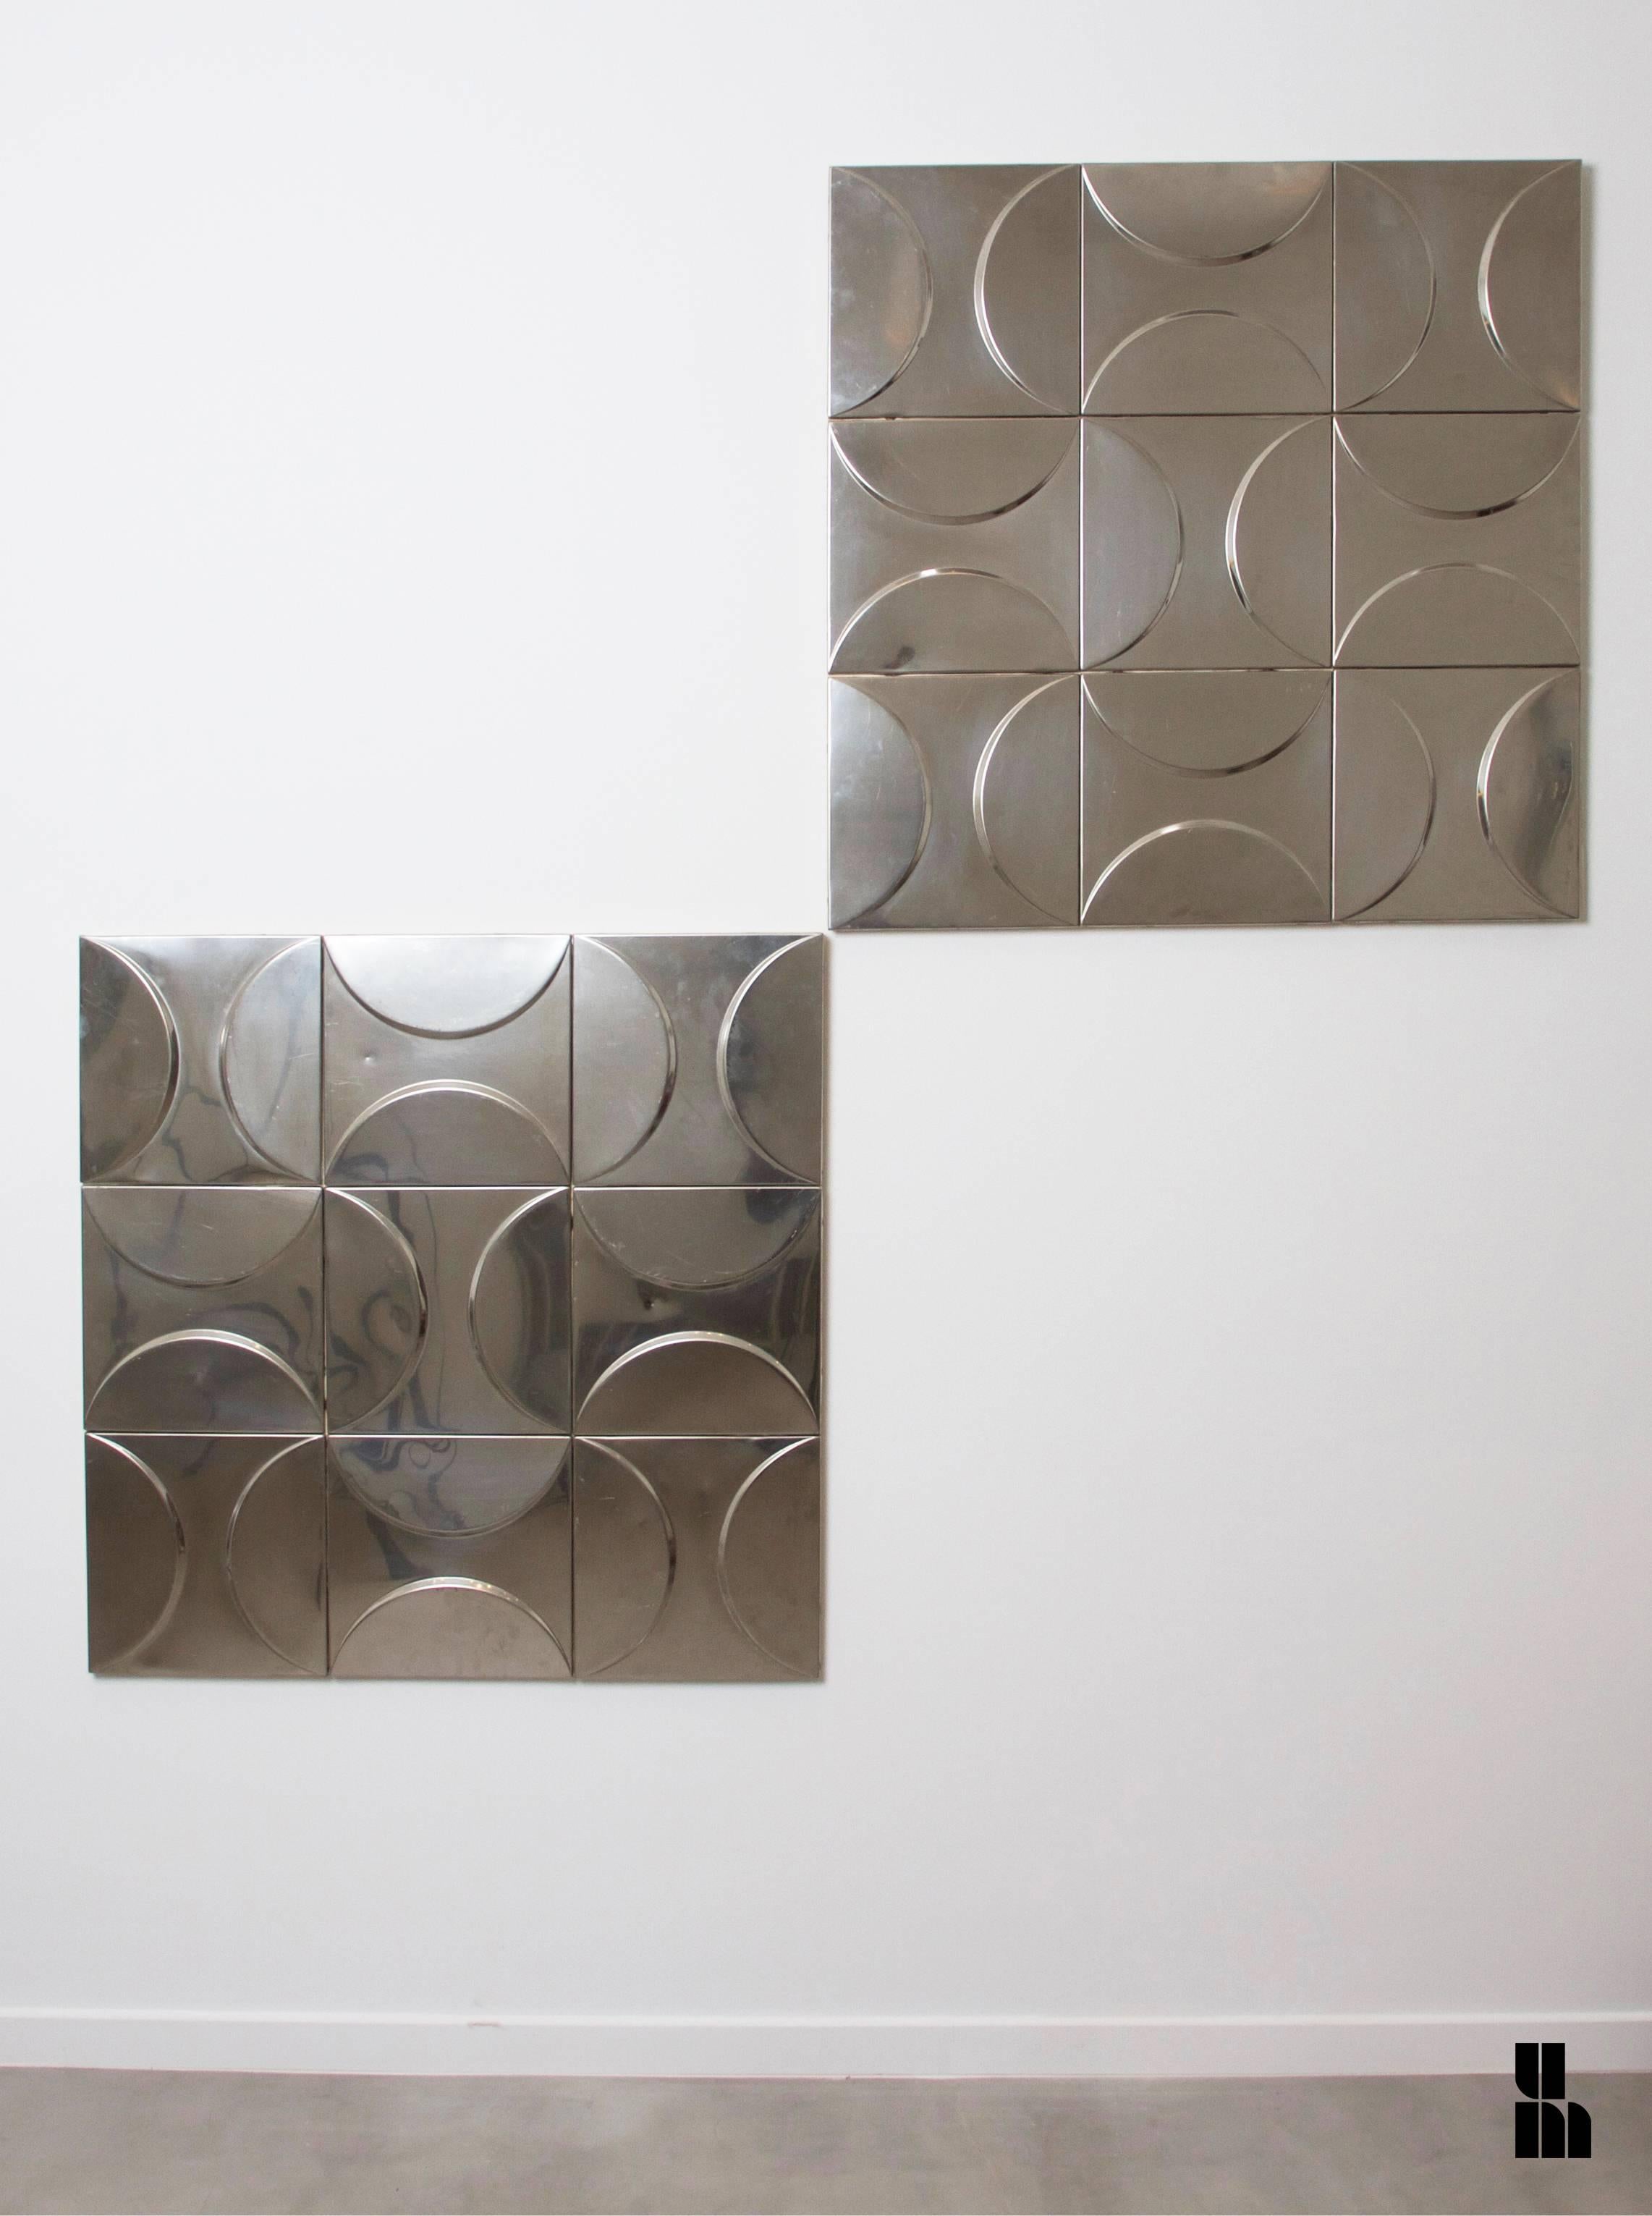 Exceptional set of 11 metal decorative panels, a French work from the 1970s.
Each panel is composed of nine square plates (30 cm x 30cm) mounted on a thin woodboard. The entire set measures about 10m2 for an outstanding effect.
Good original